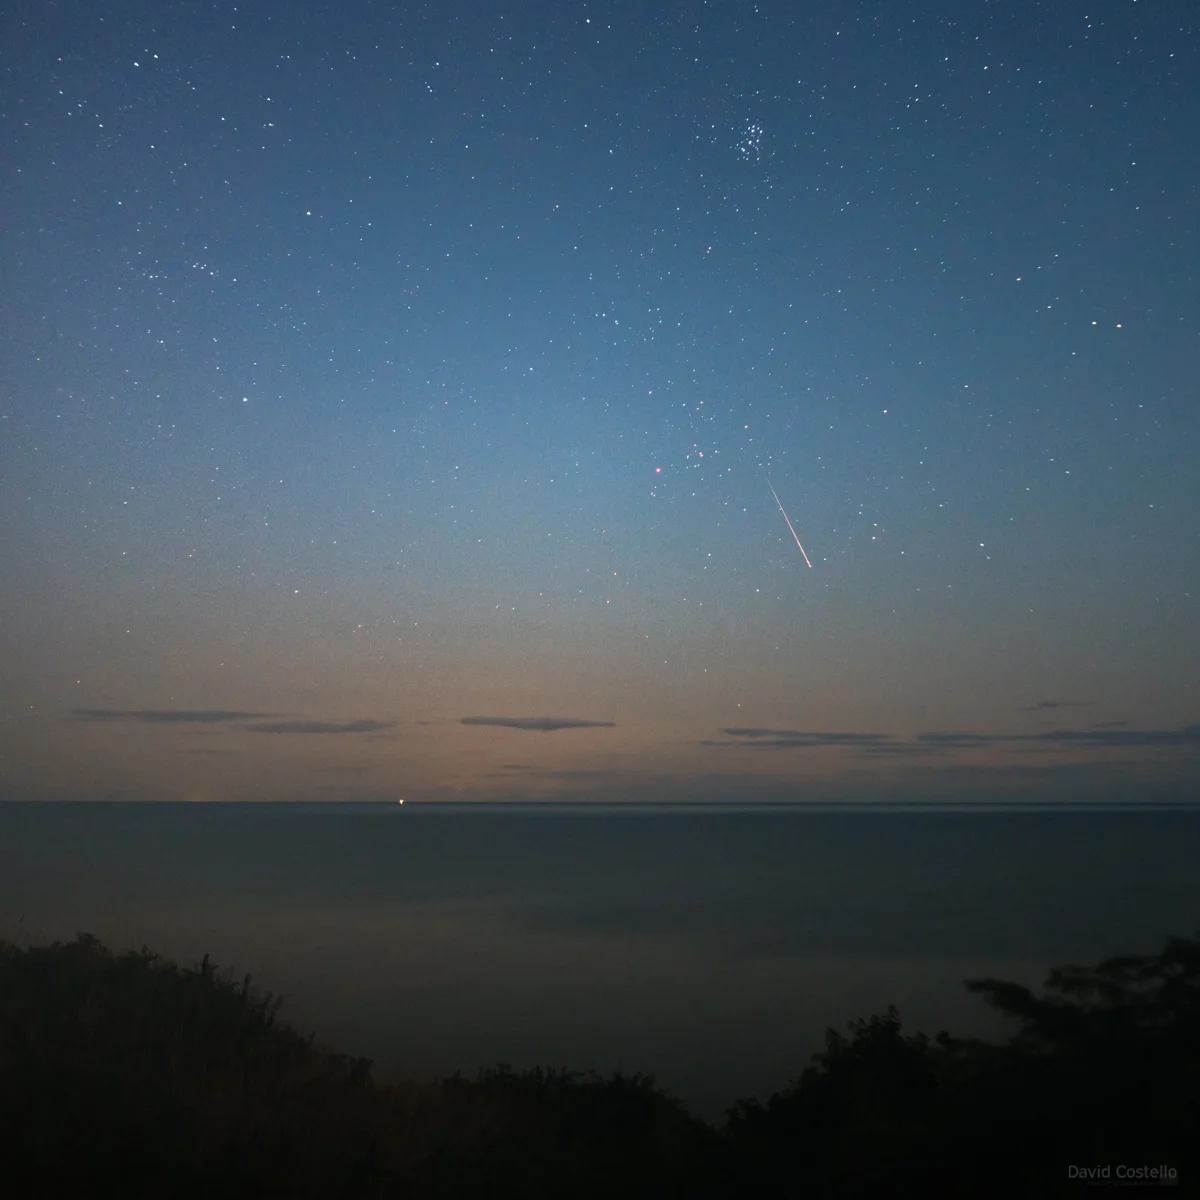 A Perseid Meteor above the Irish Sea from Brittas Bay in Wicklow.